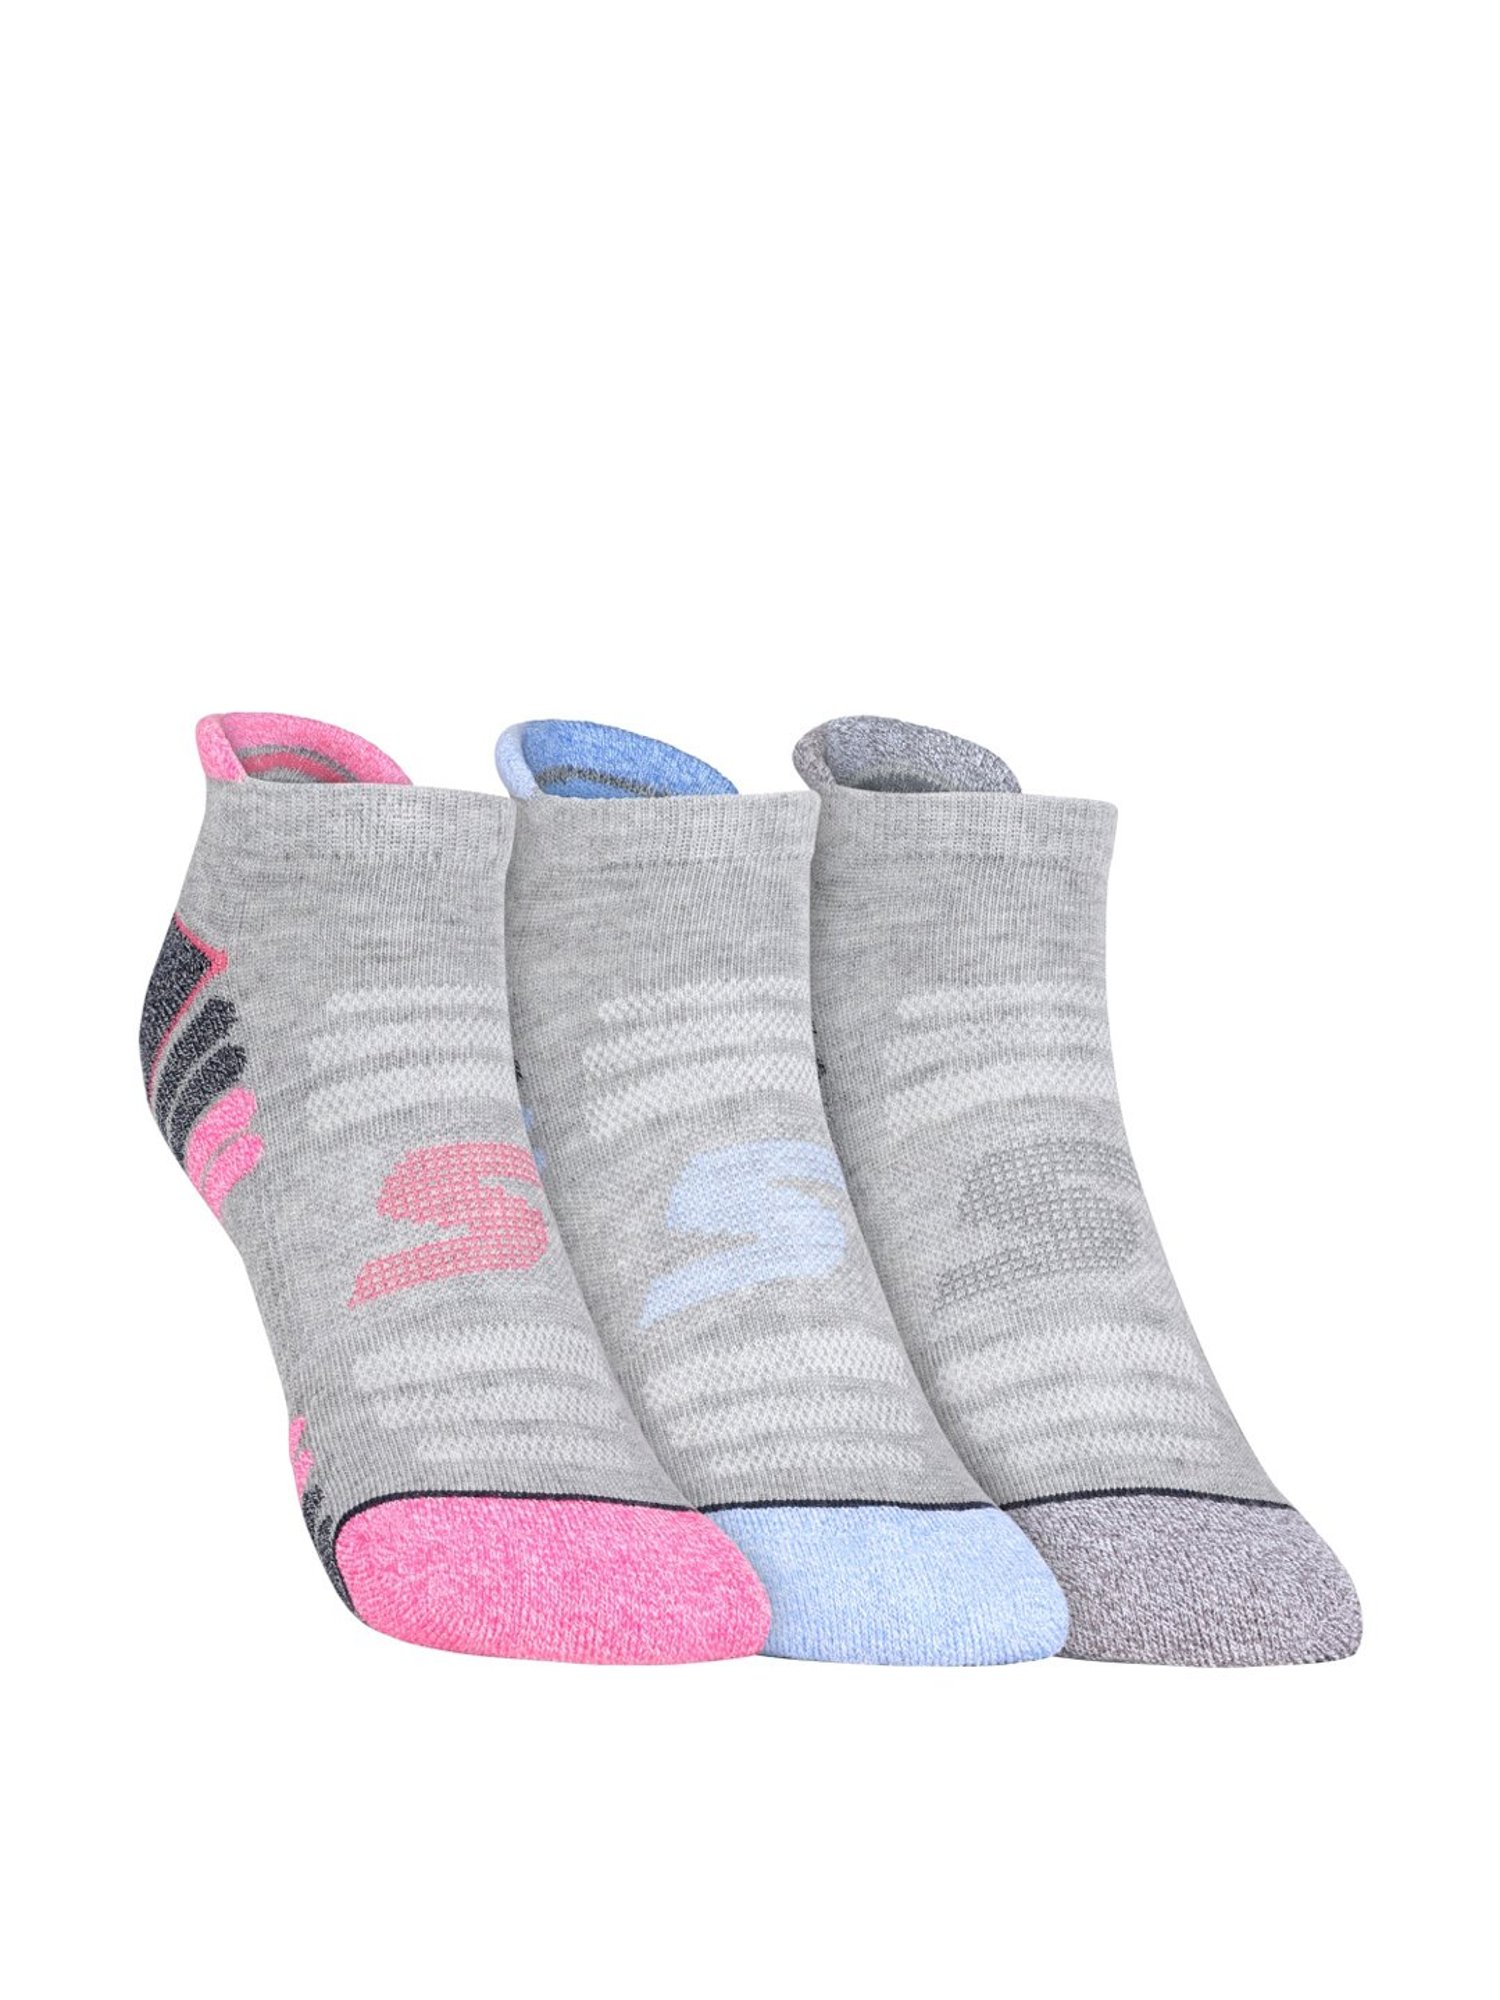 brand Downtown supermarkt Buy Skechers Low Cut Grey Textured Socks for Women - Pack of 3 Online At  Best Price @ Tata CLiQ